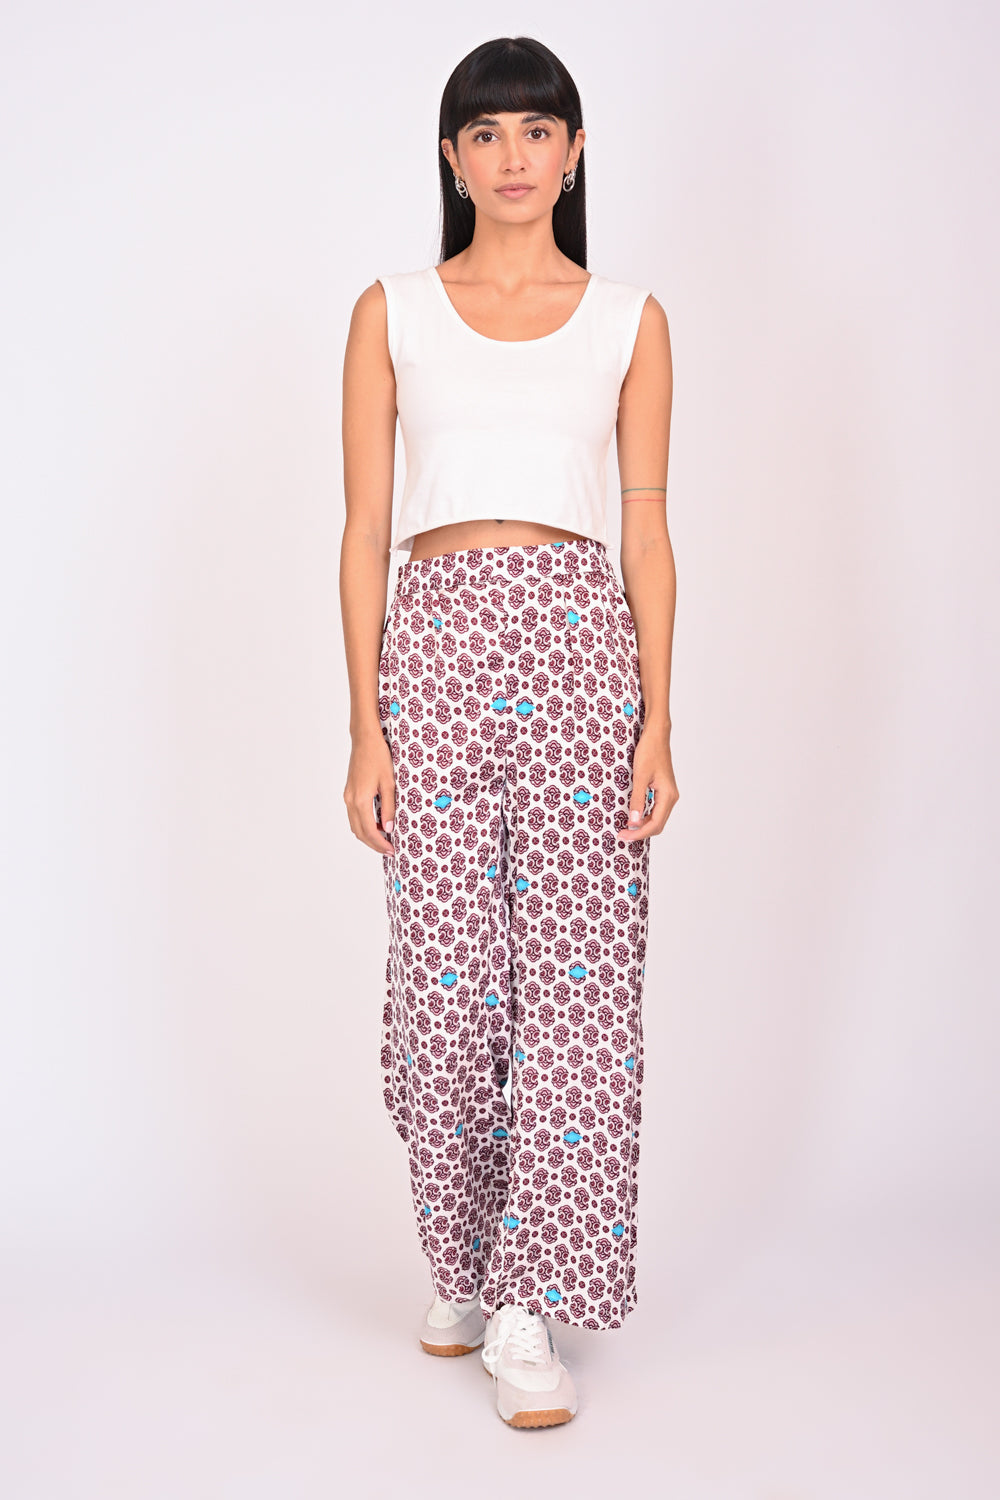 FLARED PRINTED TROUSER